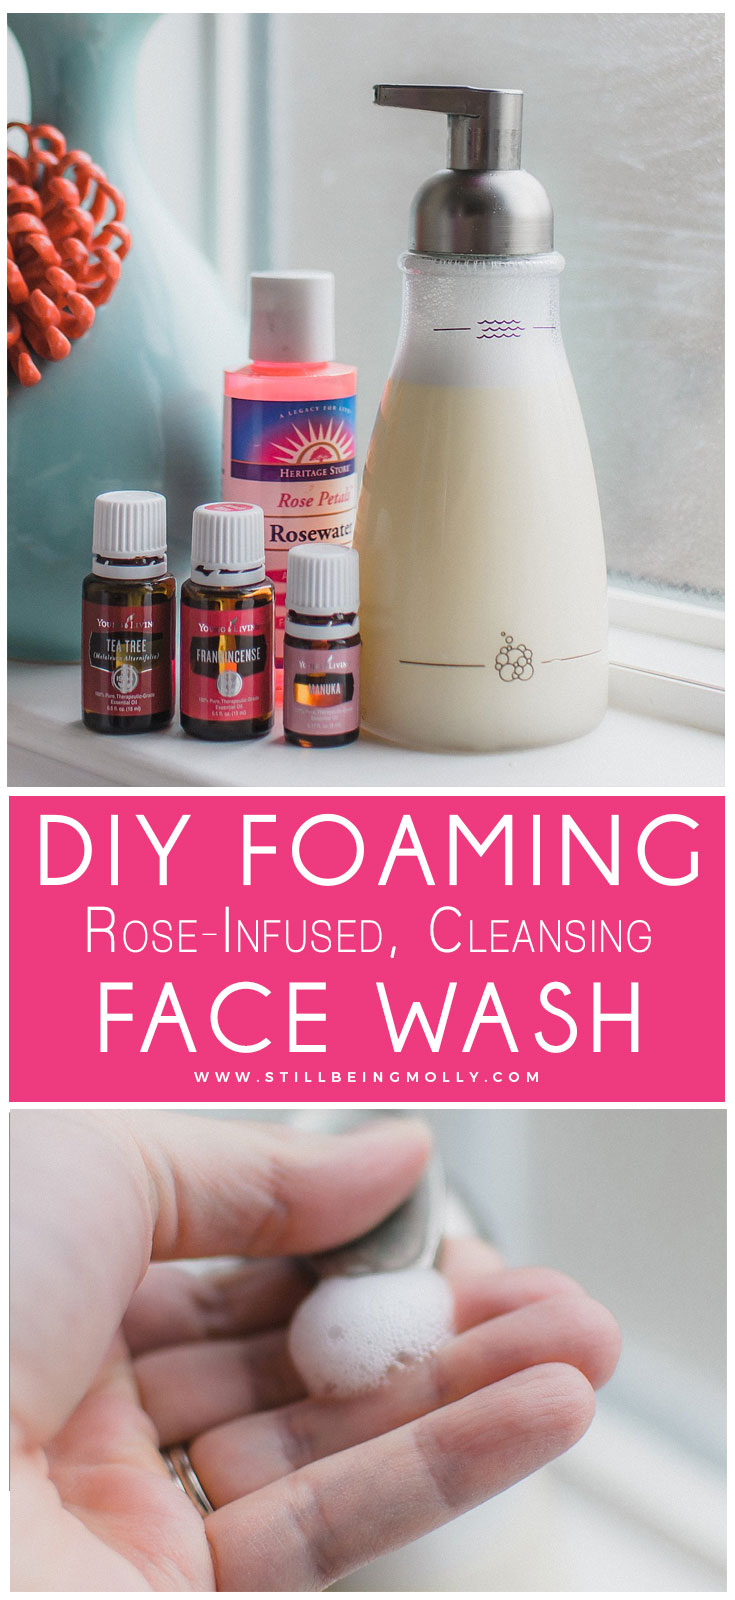  DIY Foaming Face Wash by North Carolina ethical blogger Still Being Molly